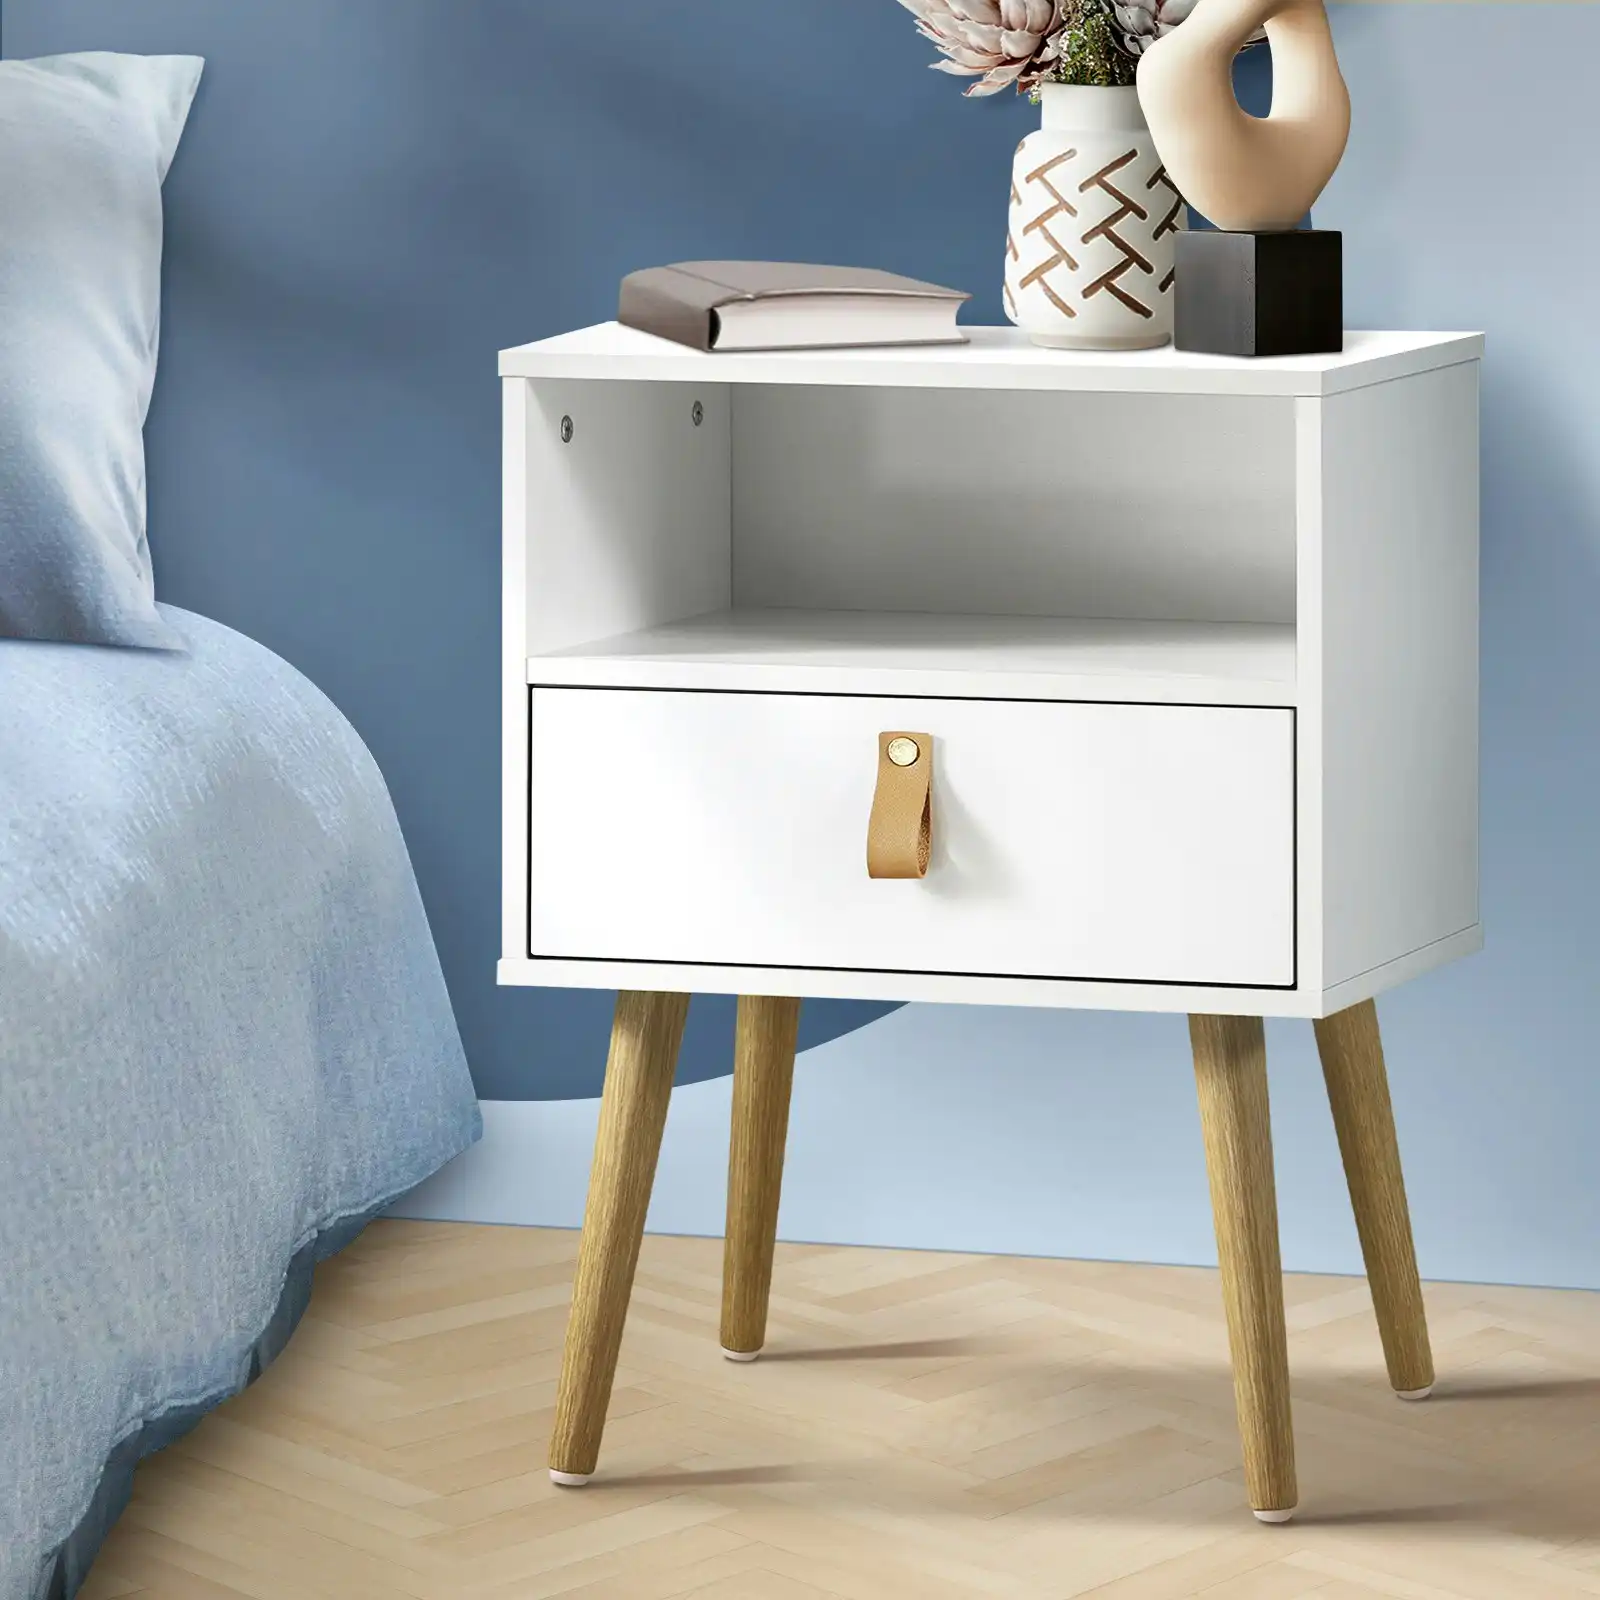 Oikiture Bedside Tables Drawers Side Table Cabinet Bedroom Nightstand White